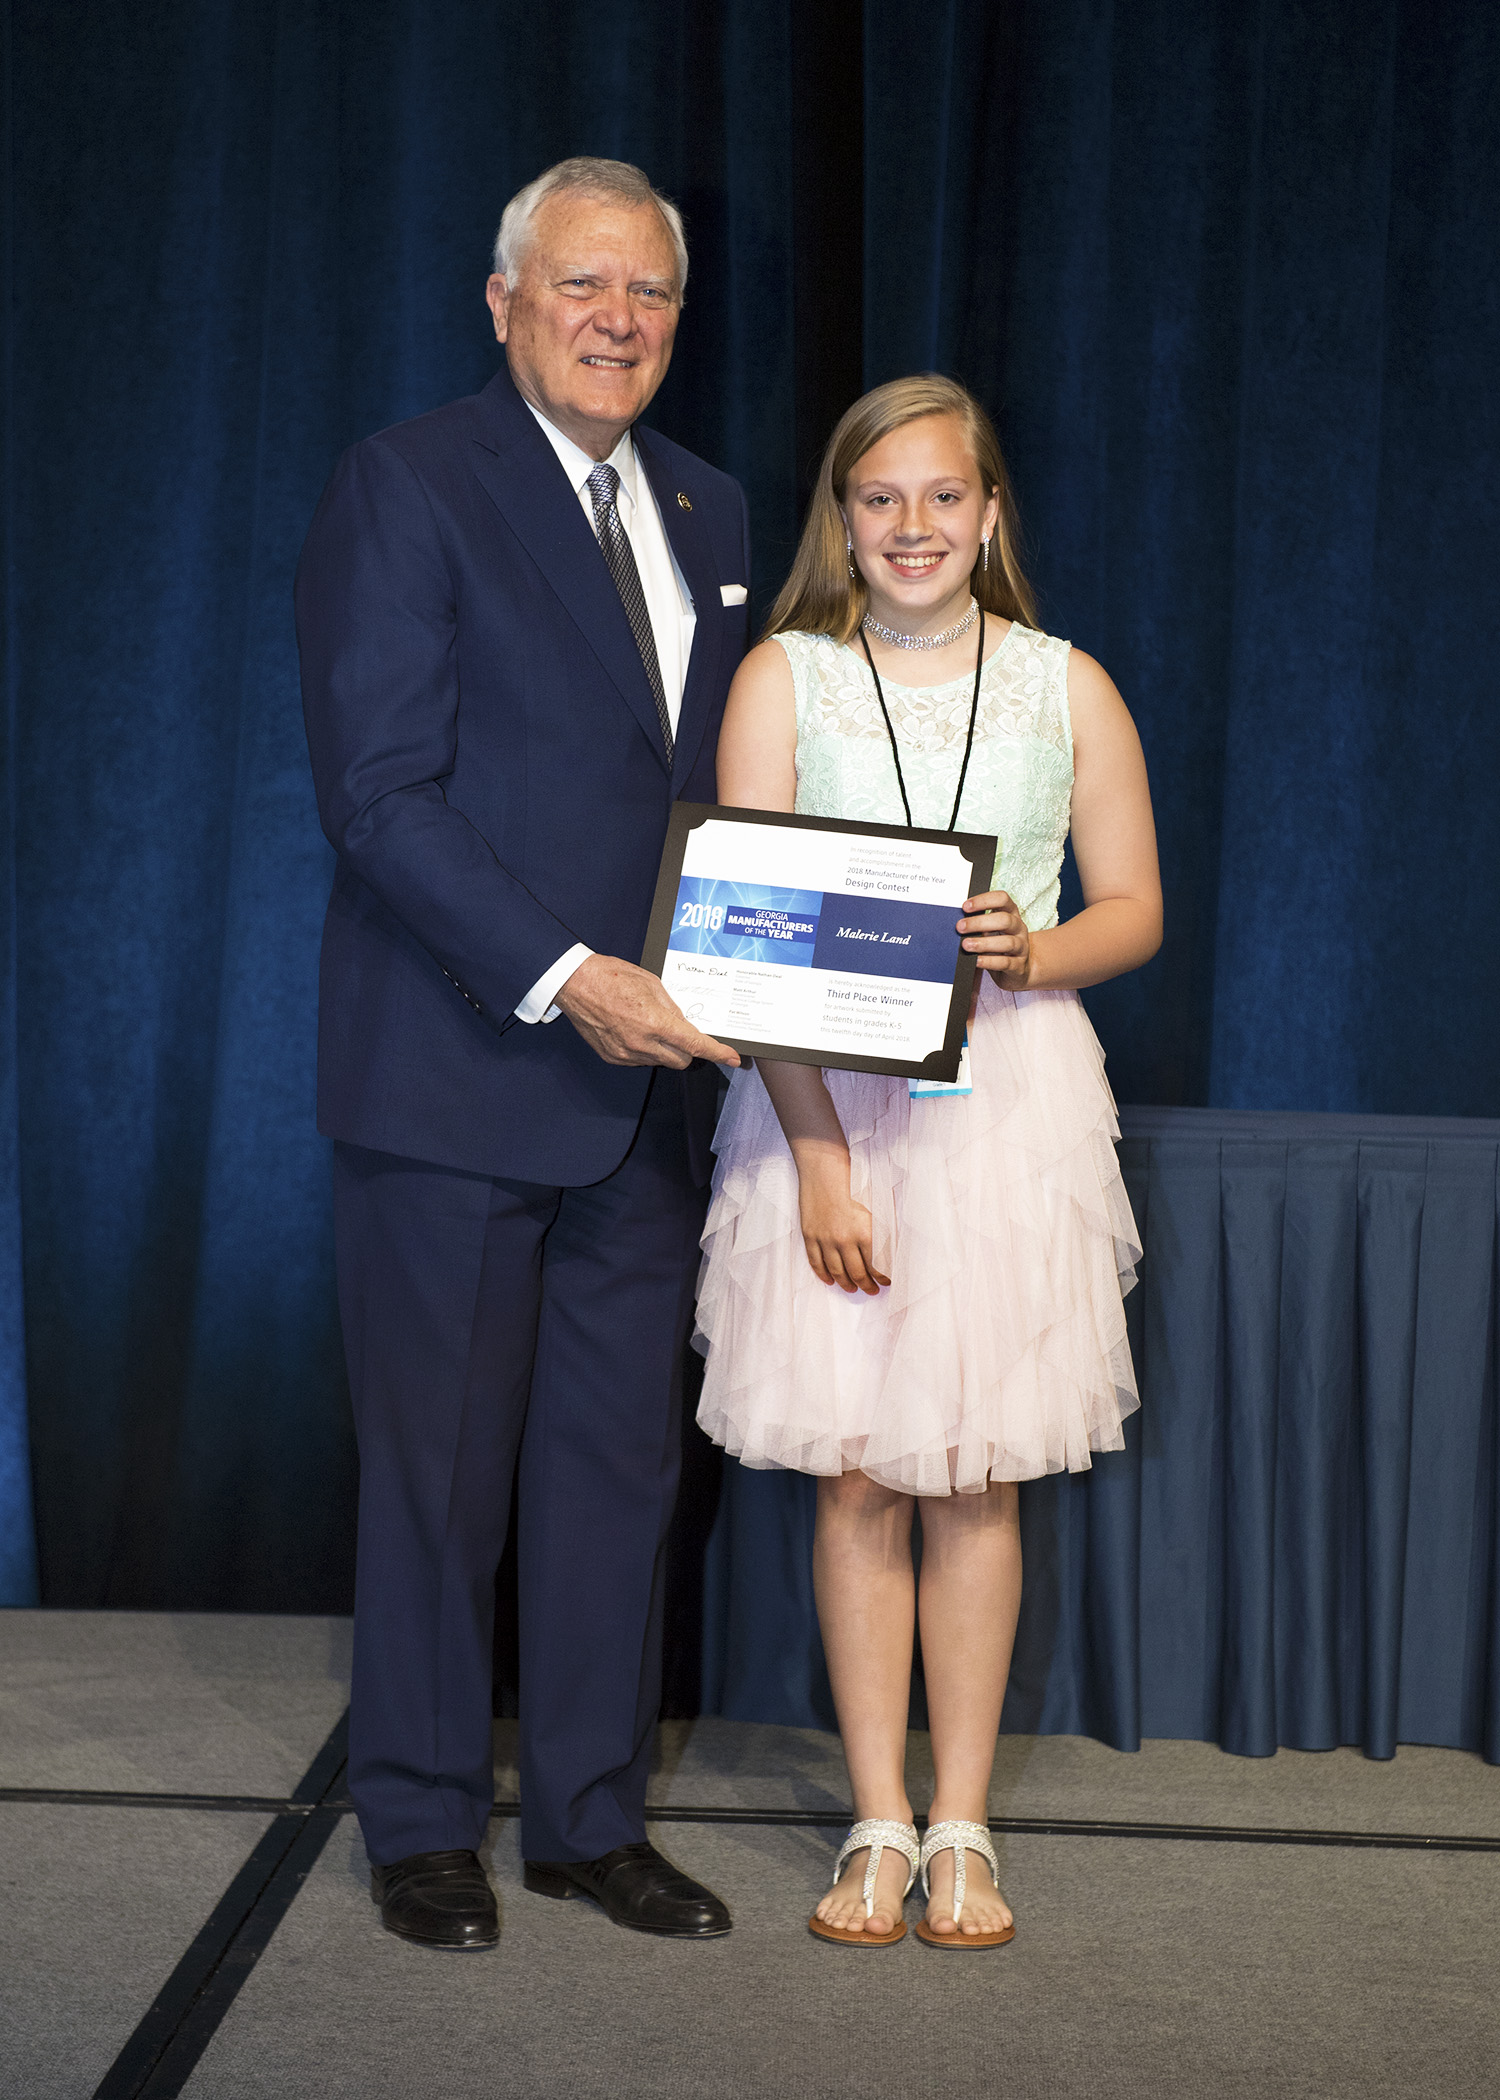 Photo for G.E.A.R. Fifth Grader, Malerie Land,  Wins Third Place in 2018 Student Design Contest